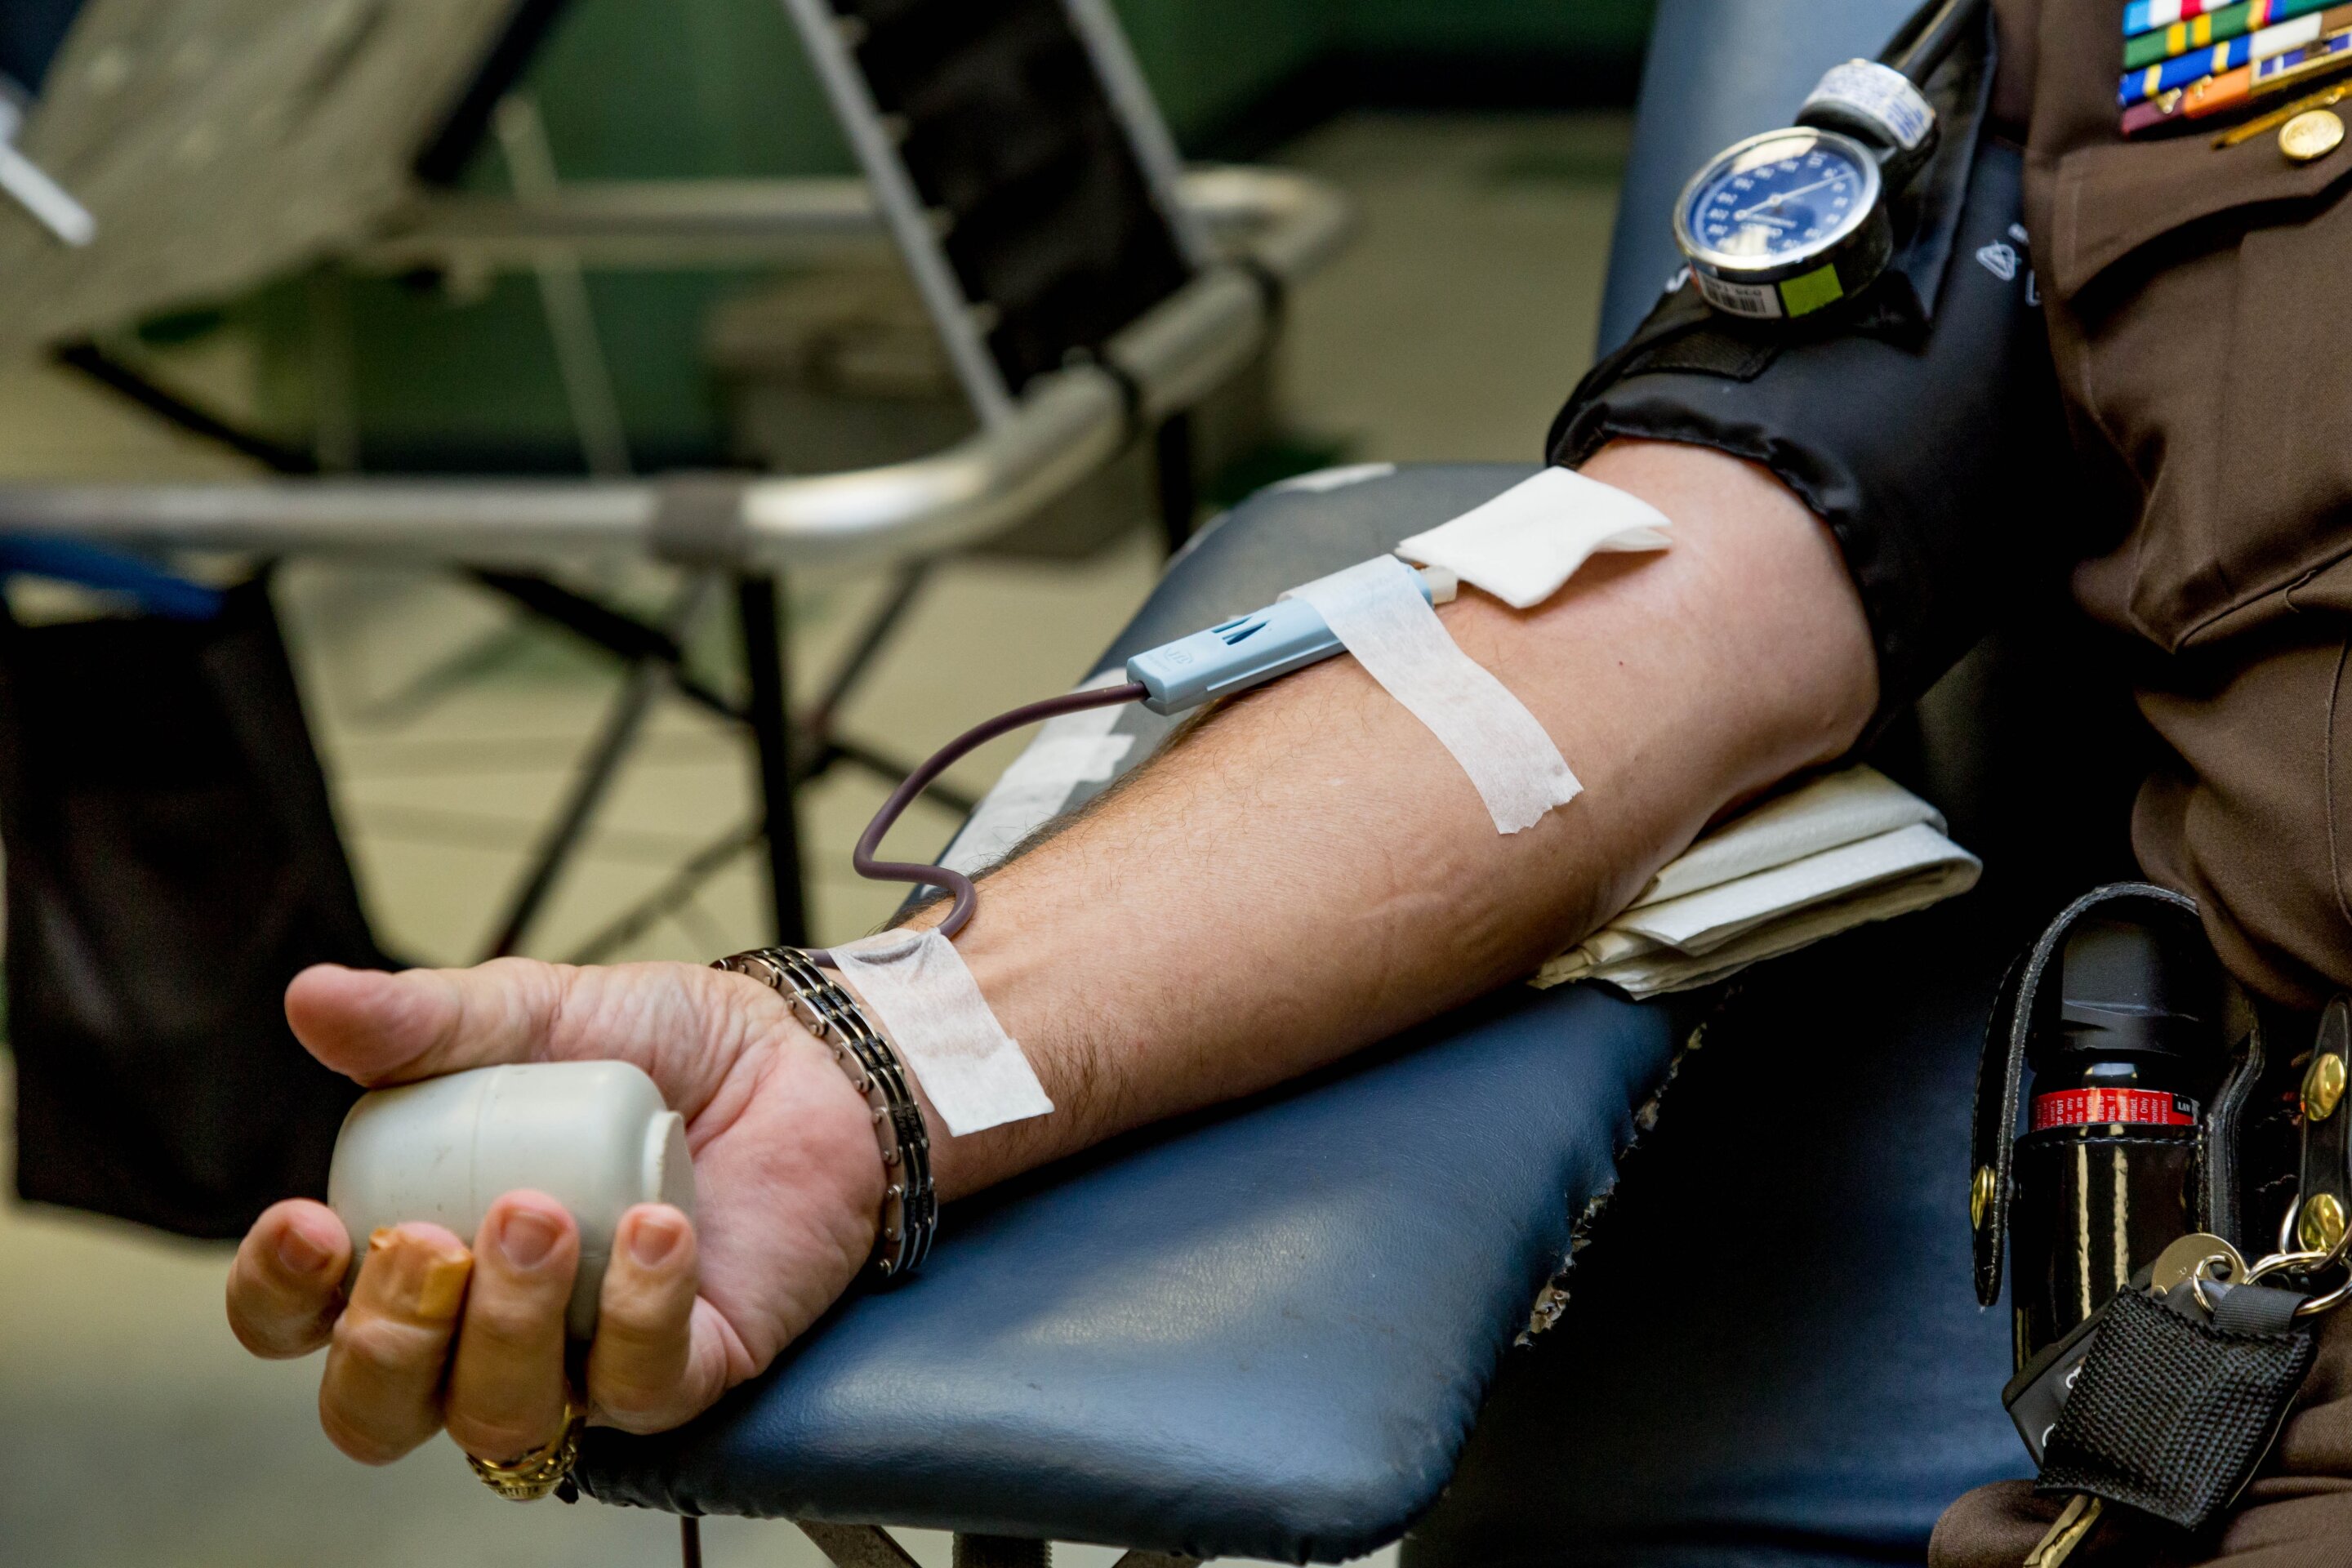 #Heart disease doesn’t have to keep you from donating blood